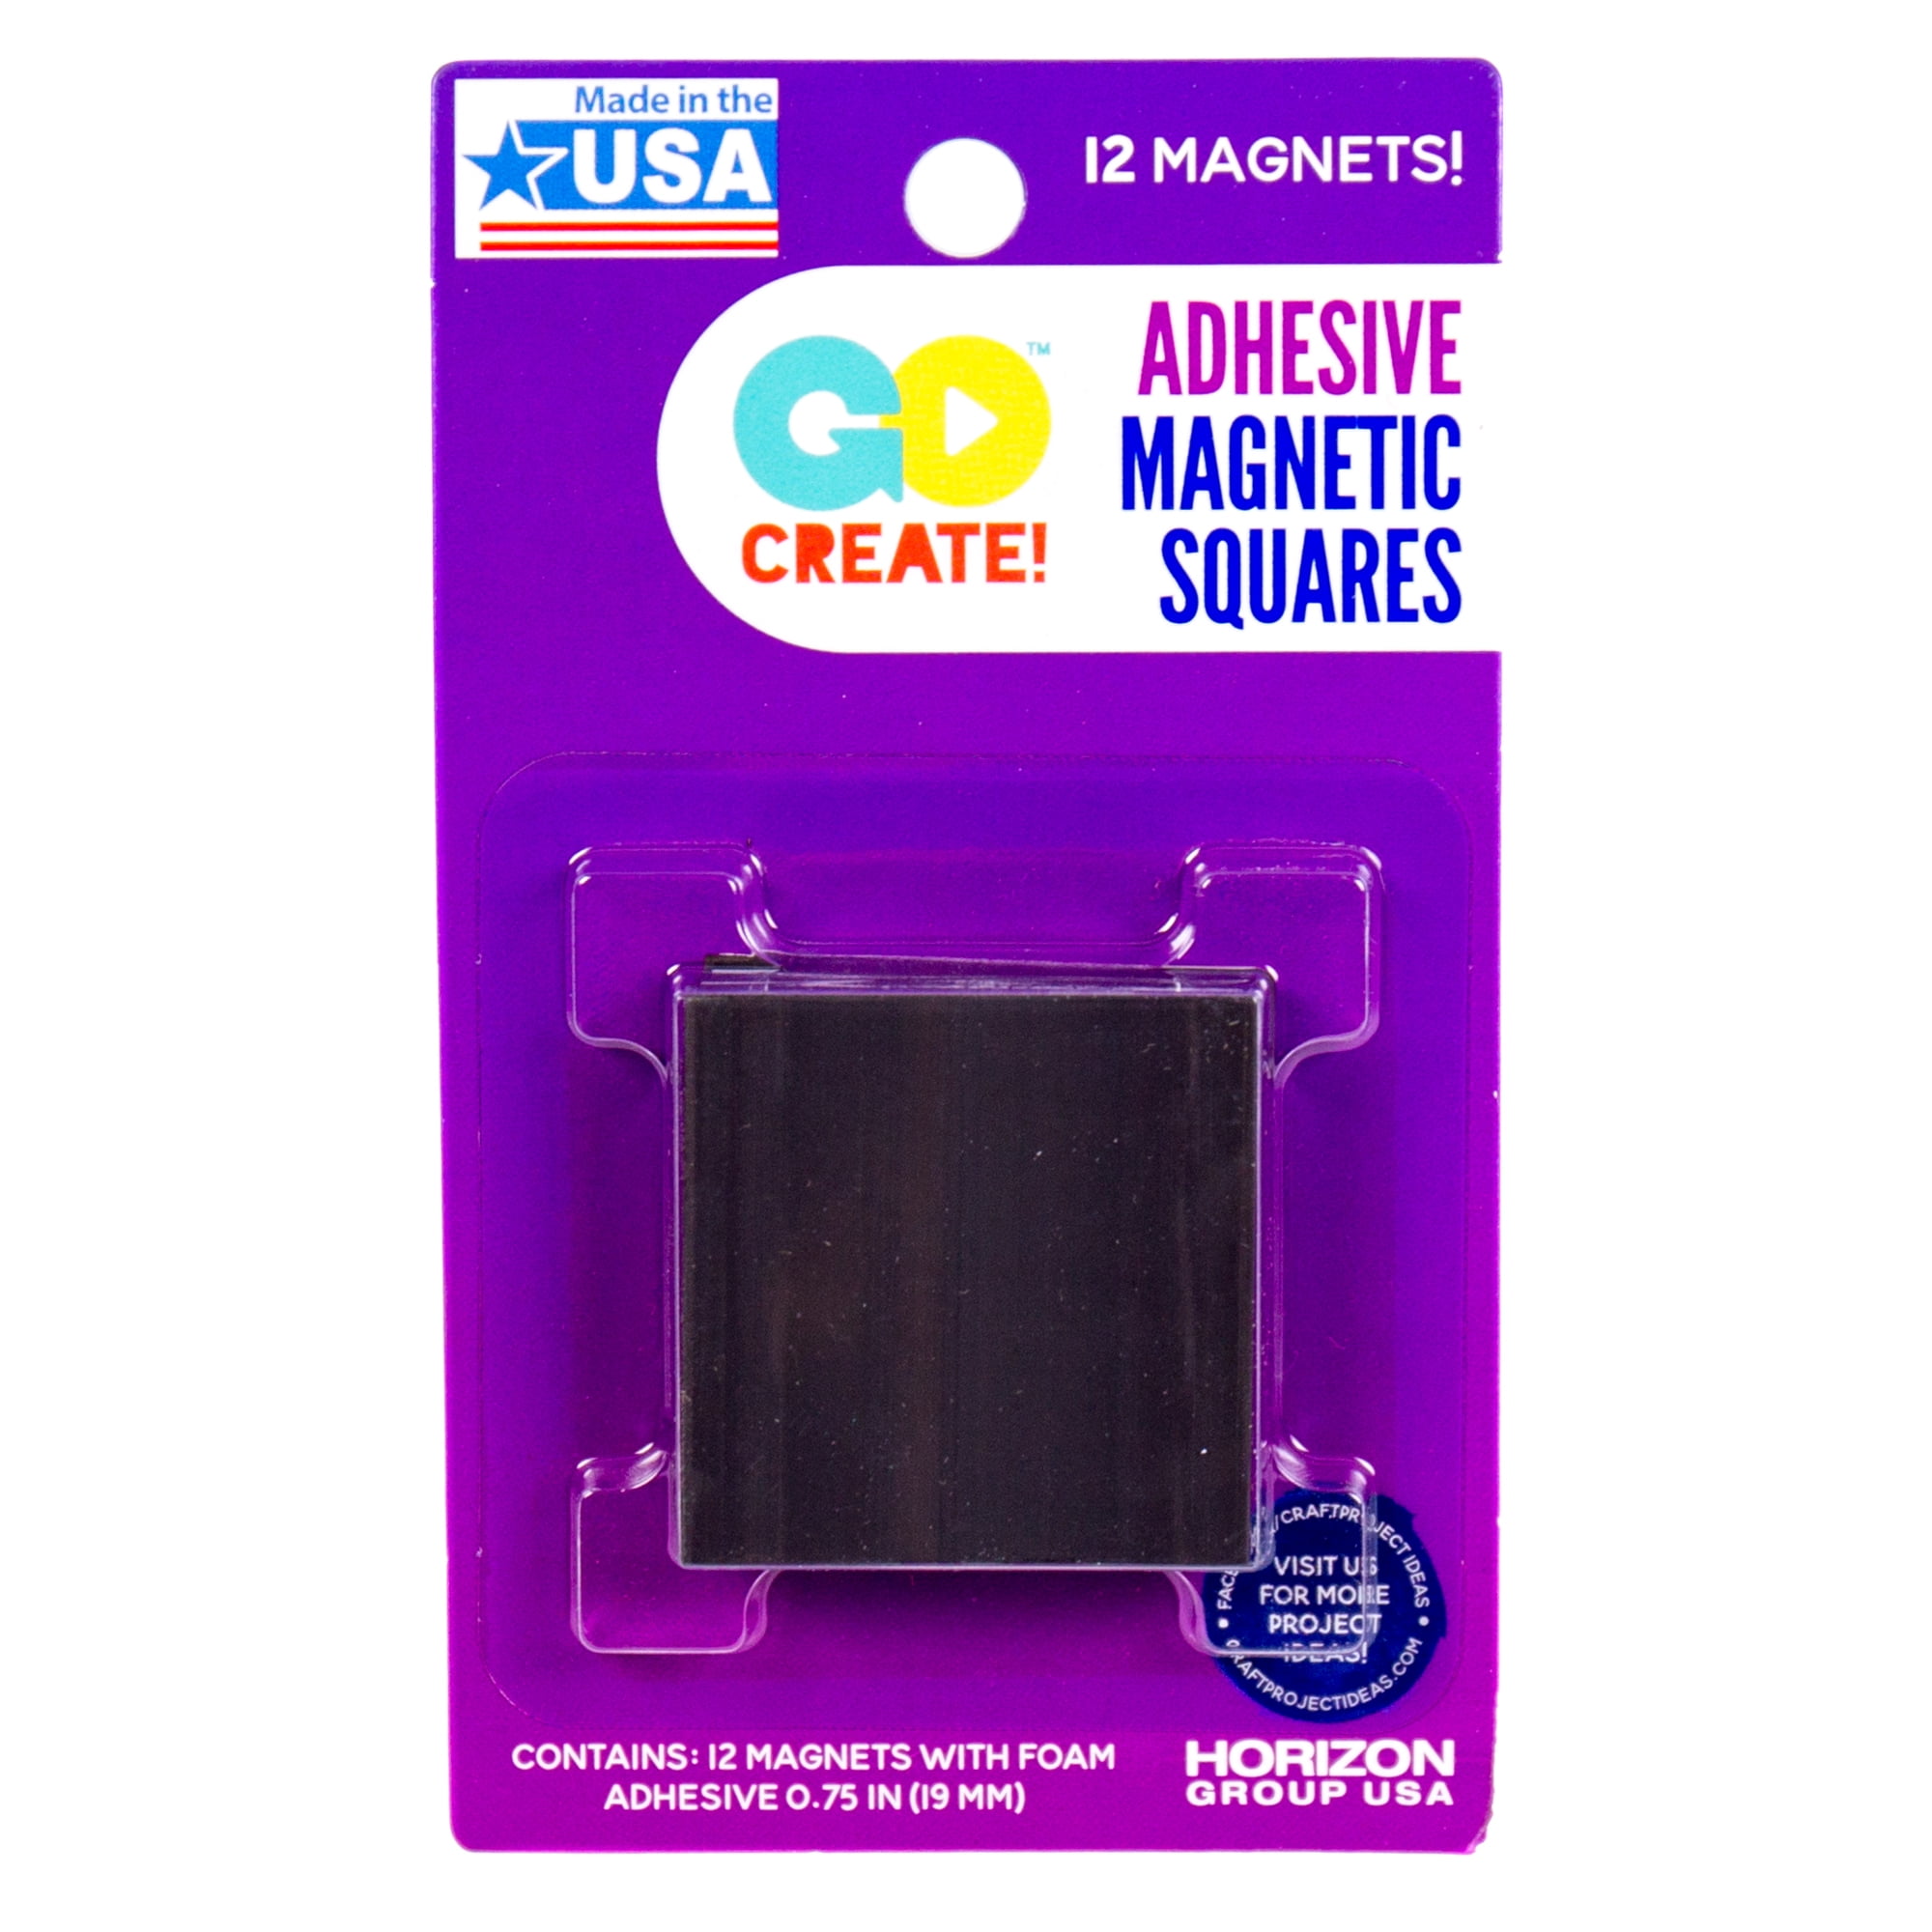 Go Create Adhesive Magnetic Sheets, 2-Pack, Create Your Own Photo Magnets